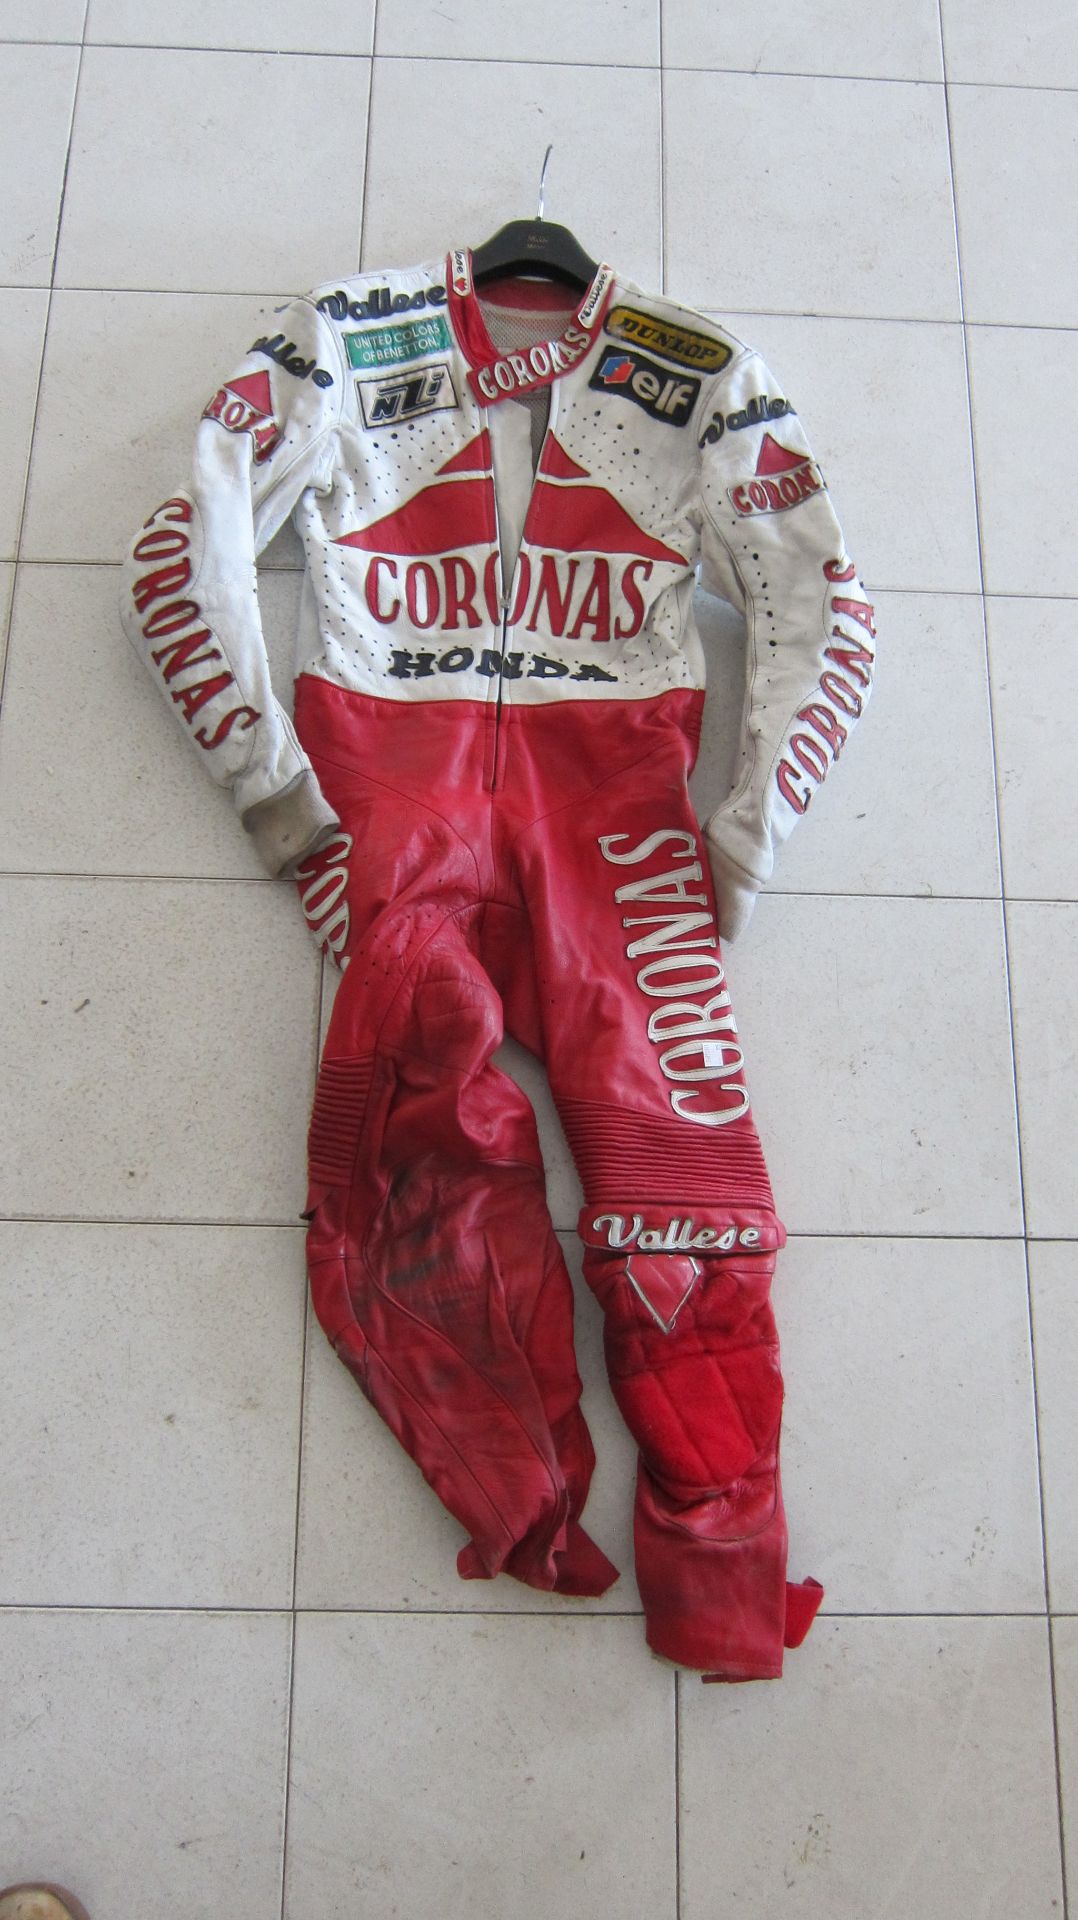 A set of Vallese Racing Motorcycle Leathers